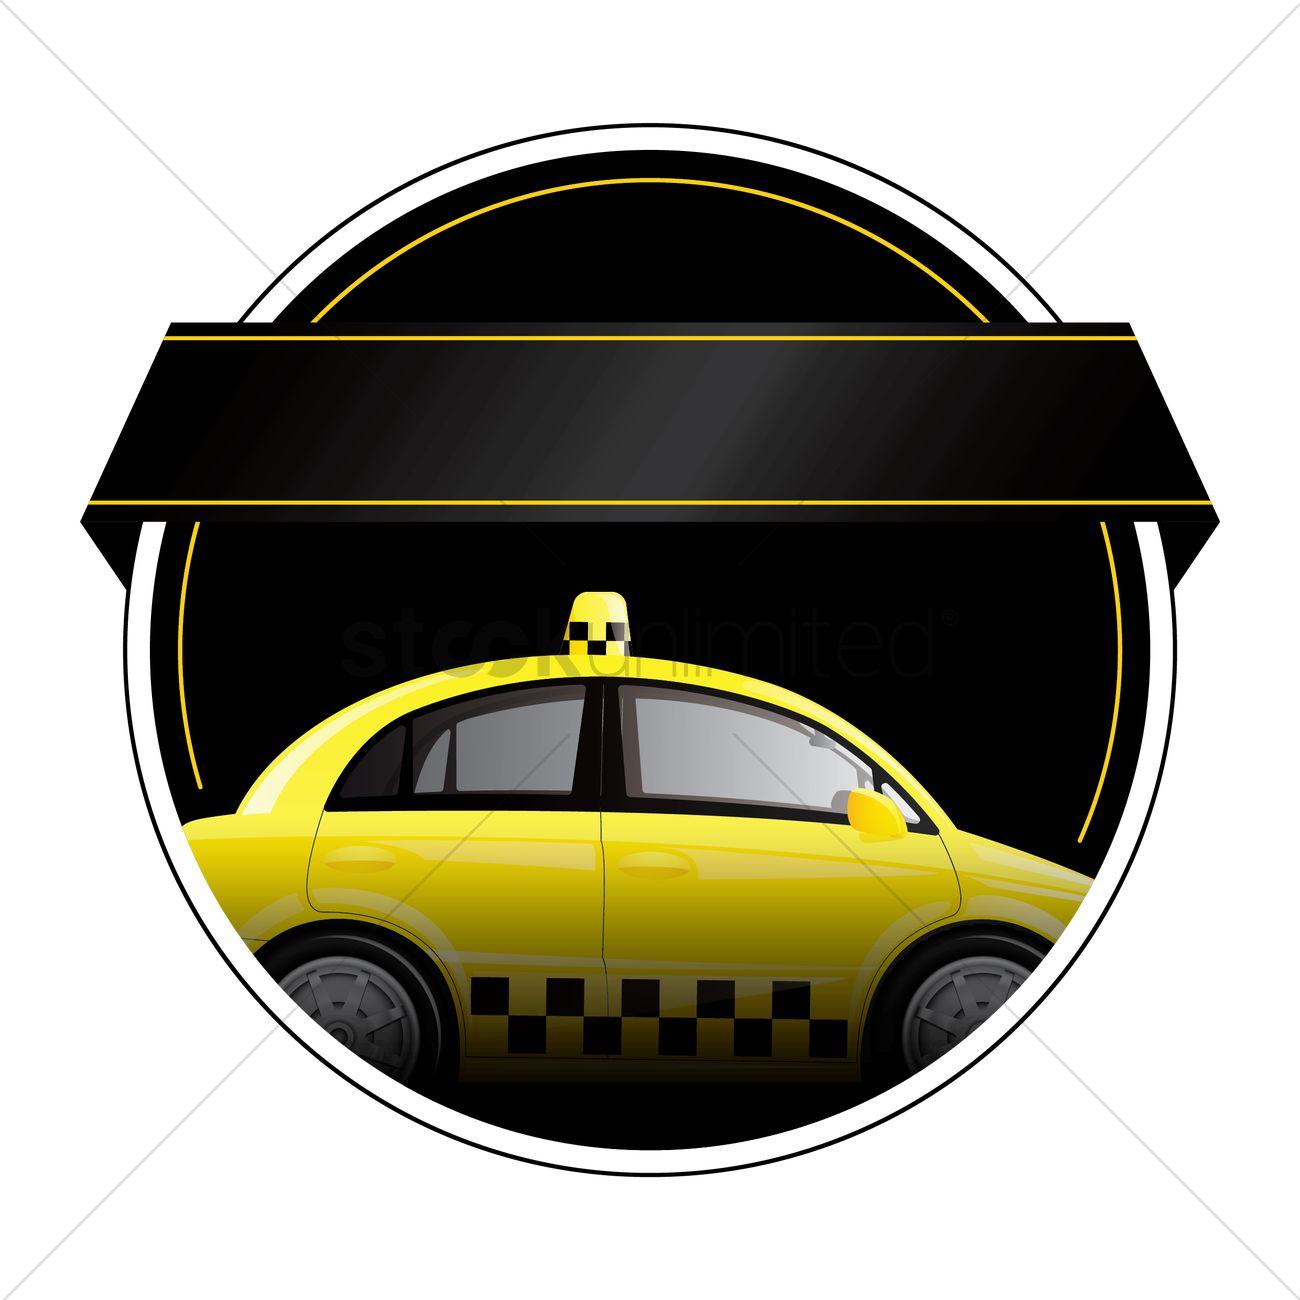 Taxi Logo - Taxi logo element Vector Image - 1992001 | StockUnlimited